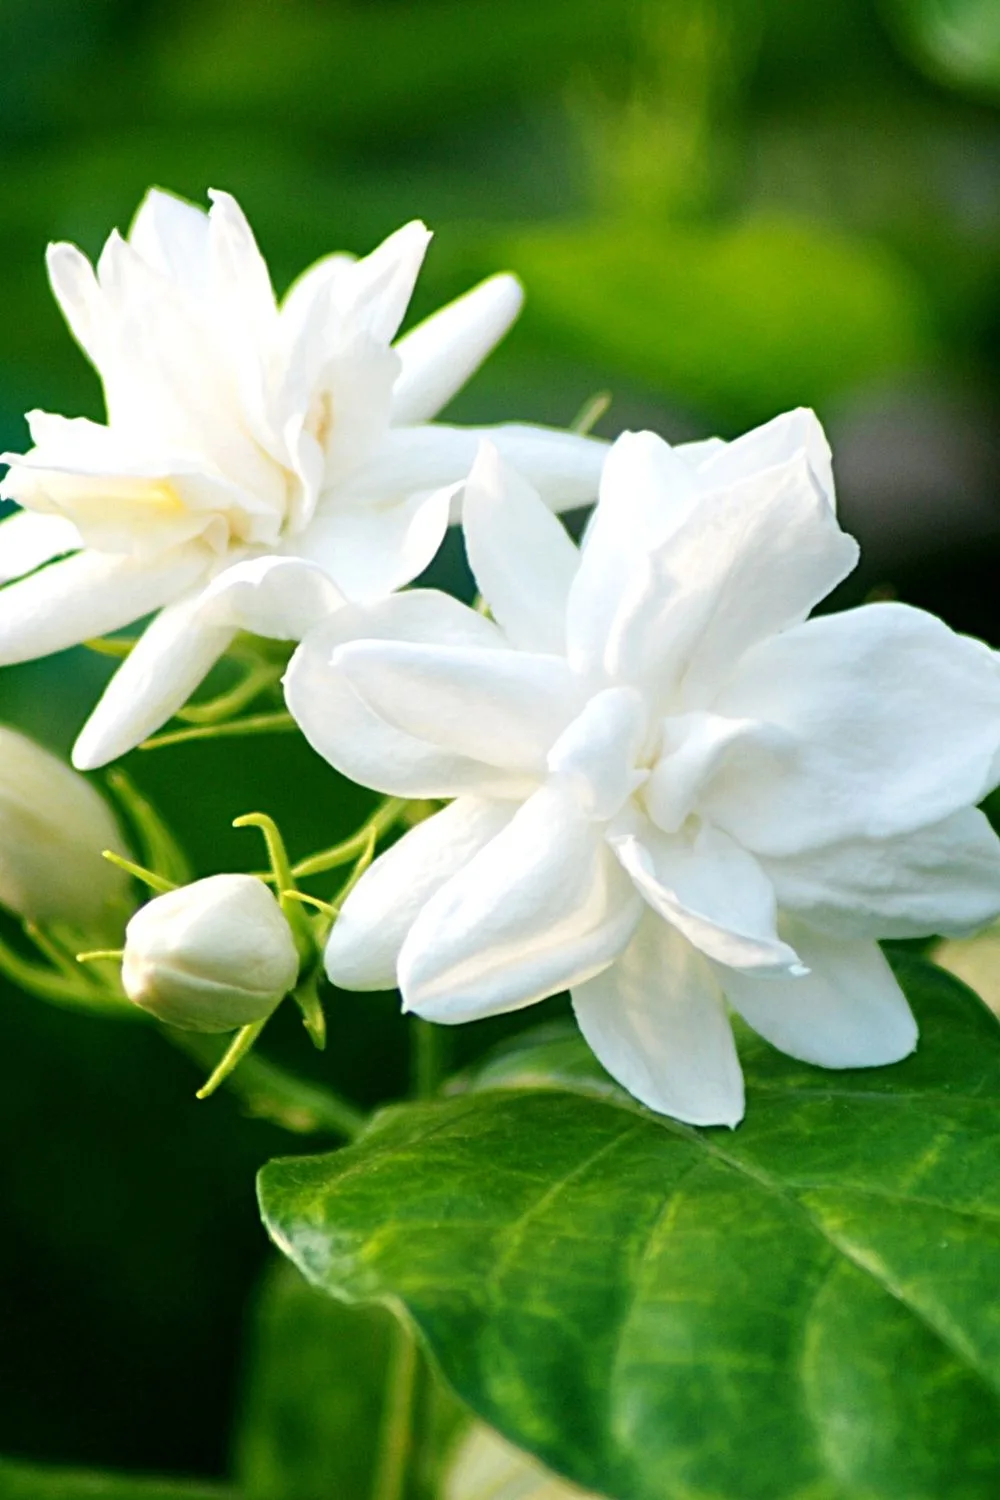 Jasmine's fragrant white blooms are a great way of beautifying your southeast-facing window